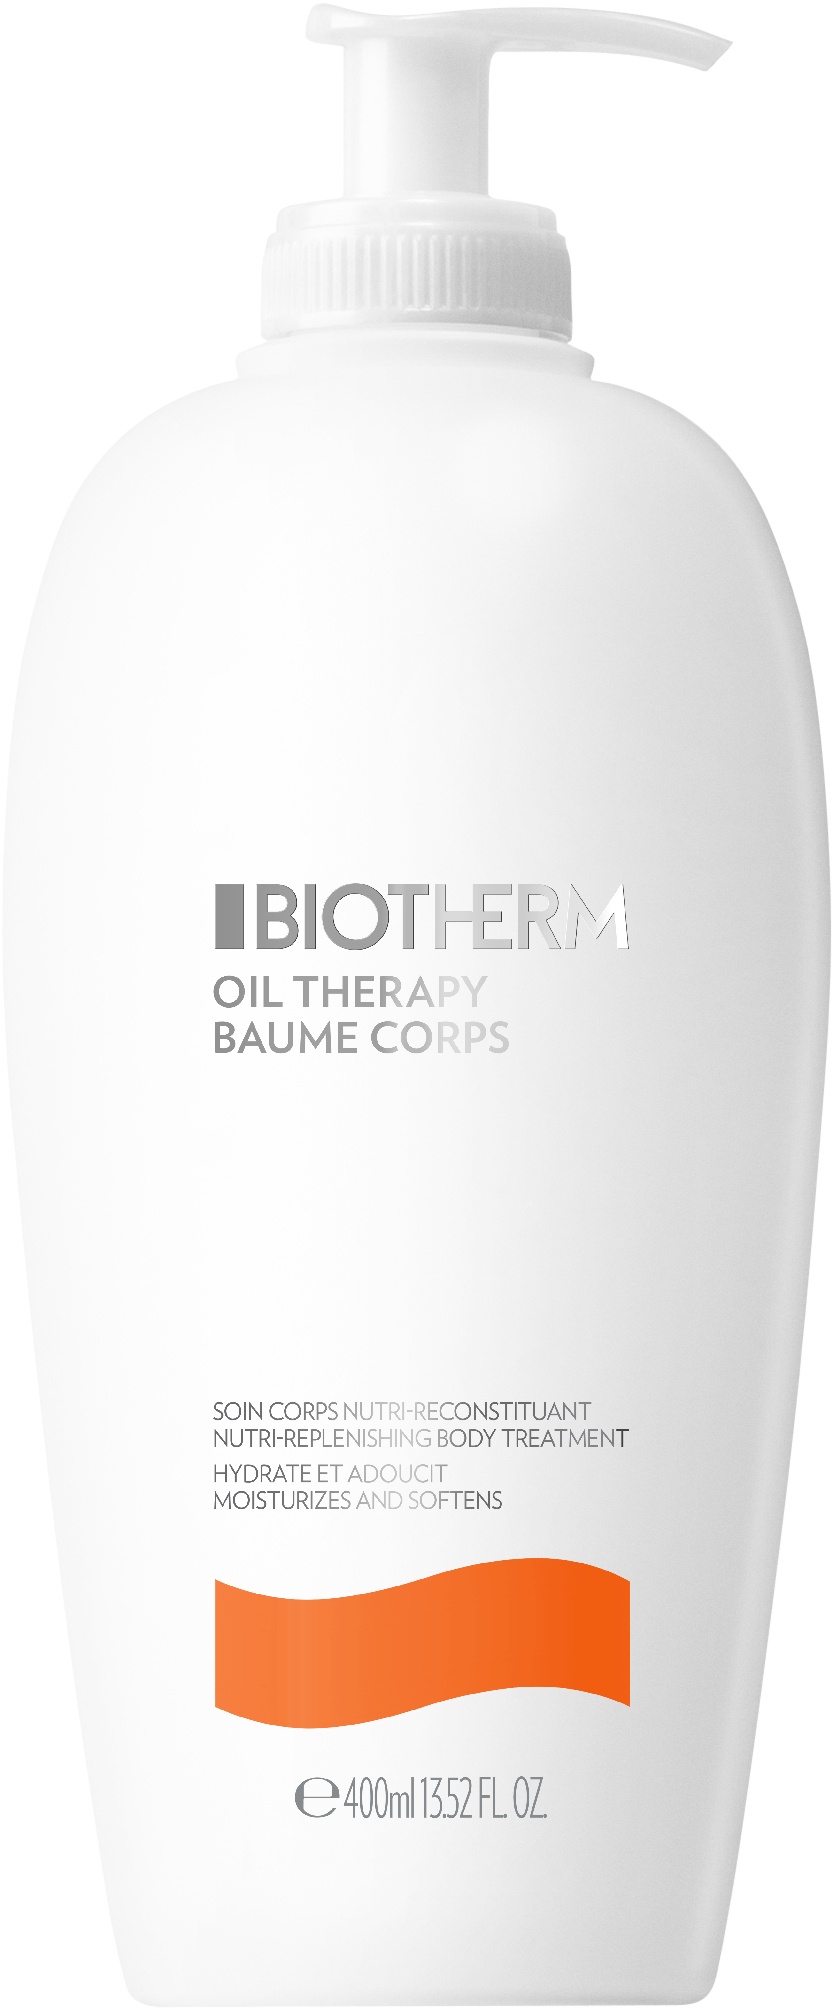 biotherm oil therapy baume corps